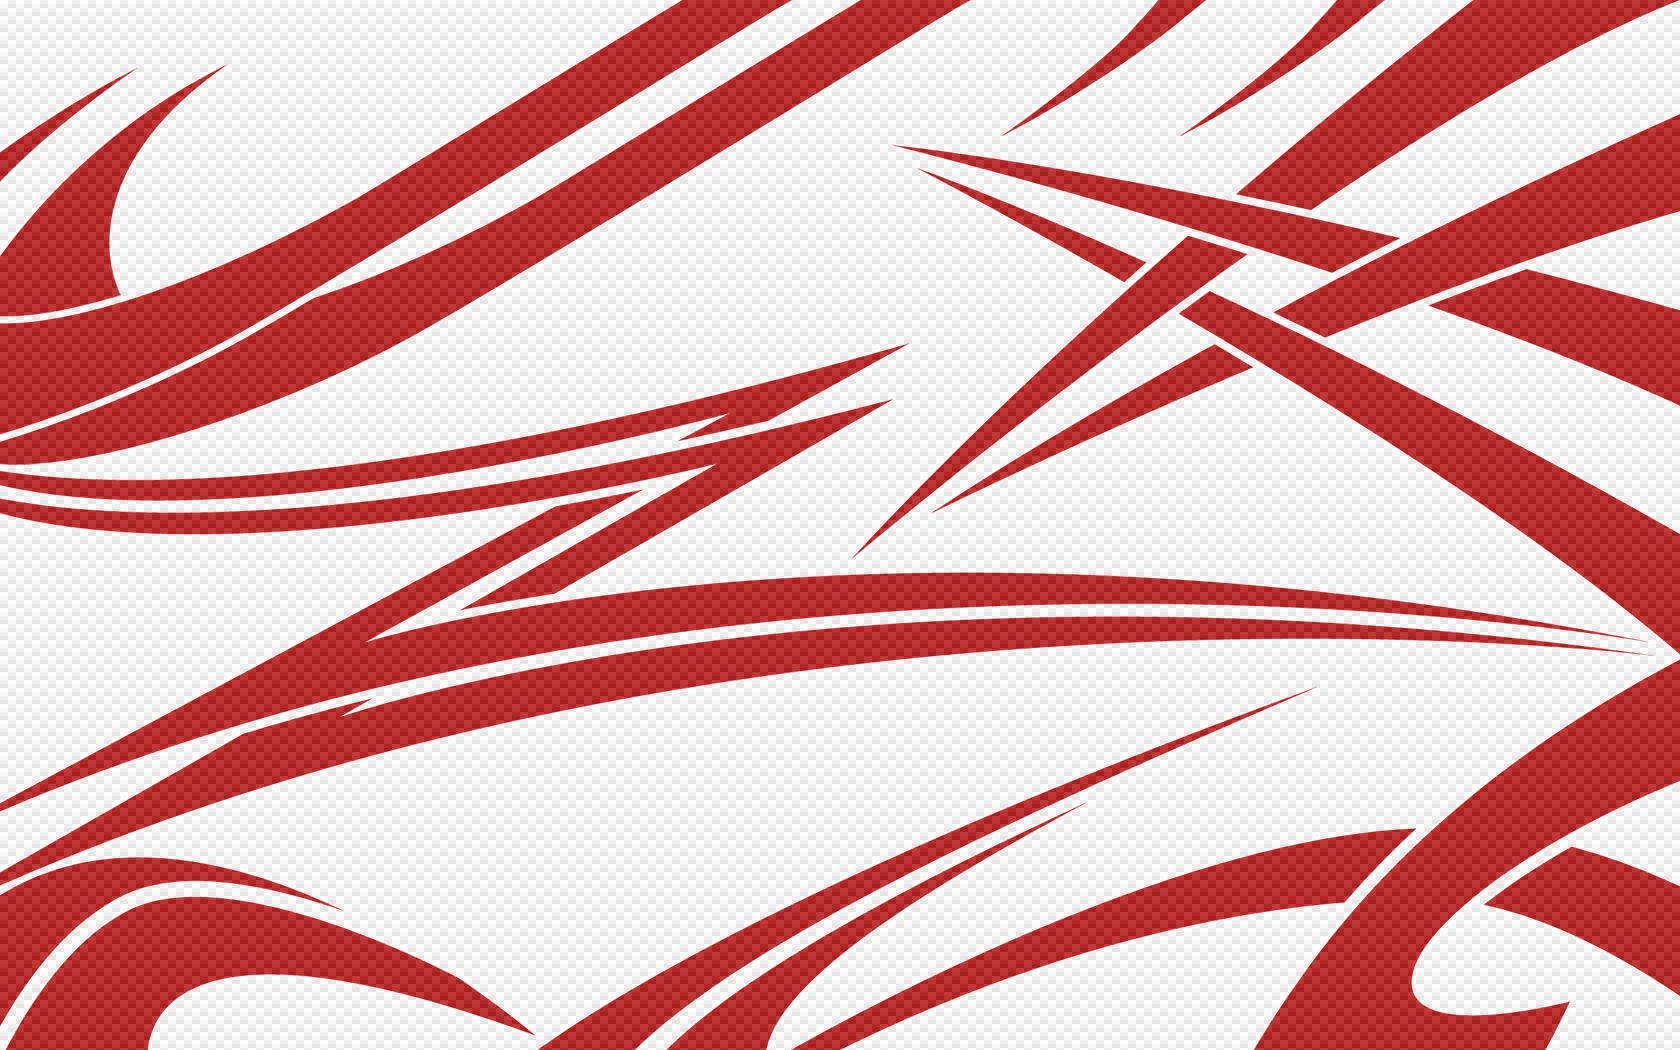 White & Red Carbon wallpapers | White & Red Carbon stock photos